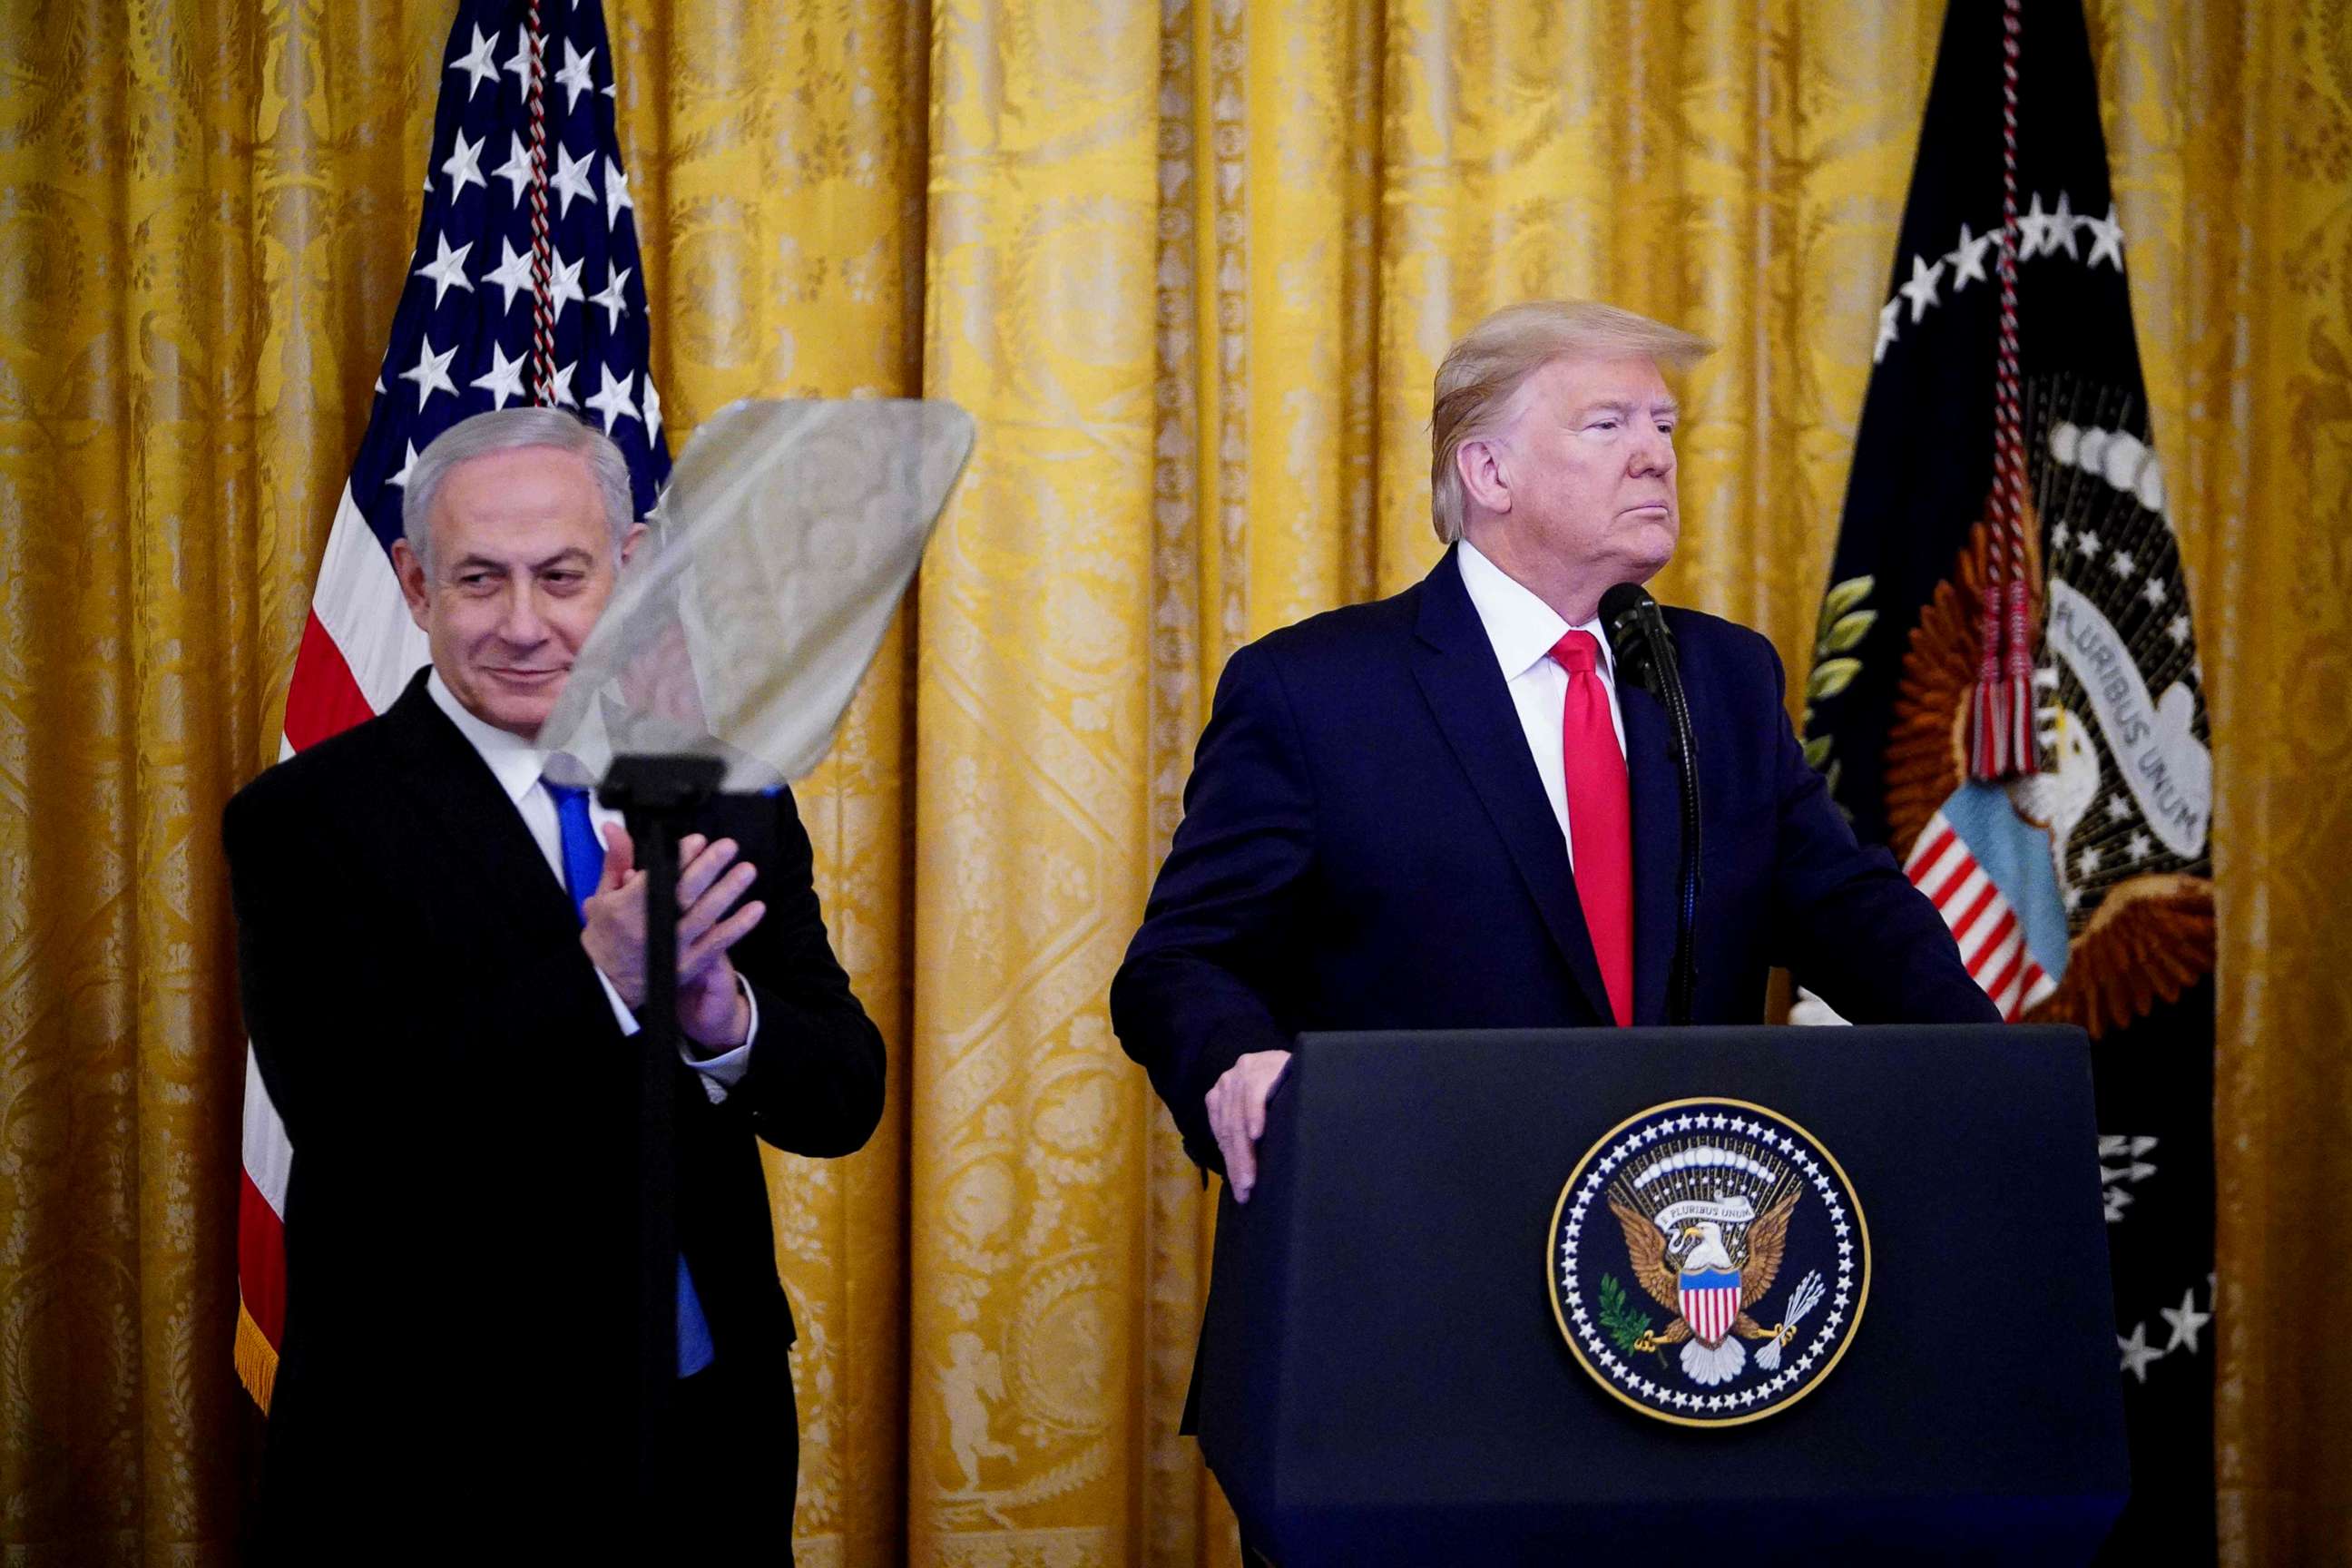 PHOTO: Israel's Prime Minister Benjamin Netanyahu and President Donald Trump take part in an announcement of Trump's Middle East peace plan in the East Room of the White House in Washington, D.C. on Jan. 28, 2020.